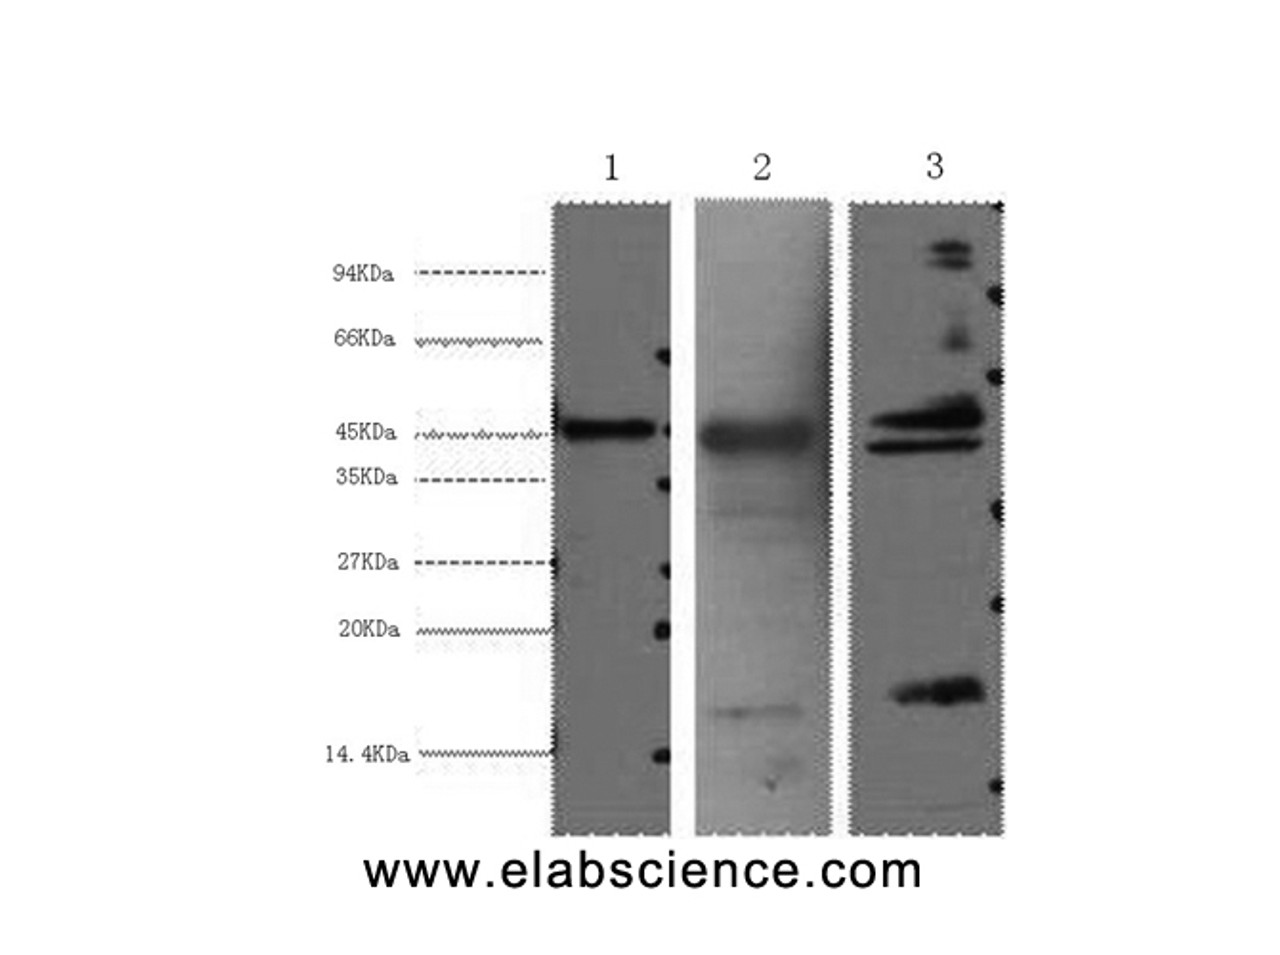 Western Blot analysis of 1) Hela, 2) Mouse heart, 3) Rat heart using AQP4 Monoclonal Antibody at dilution of 1:2000.